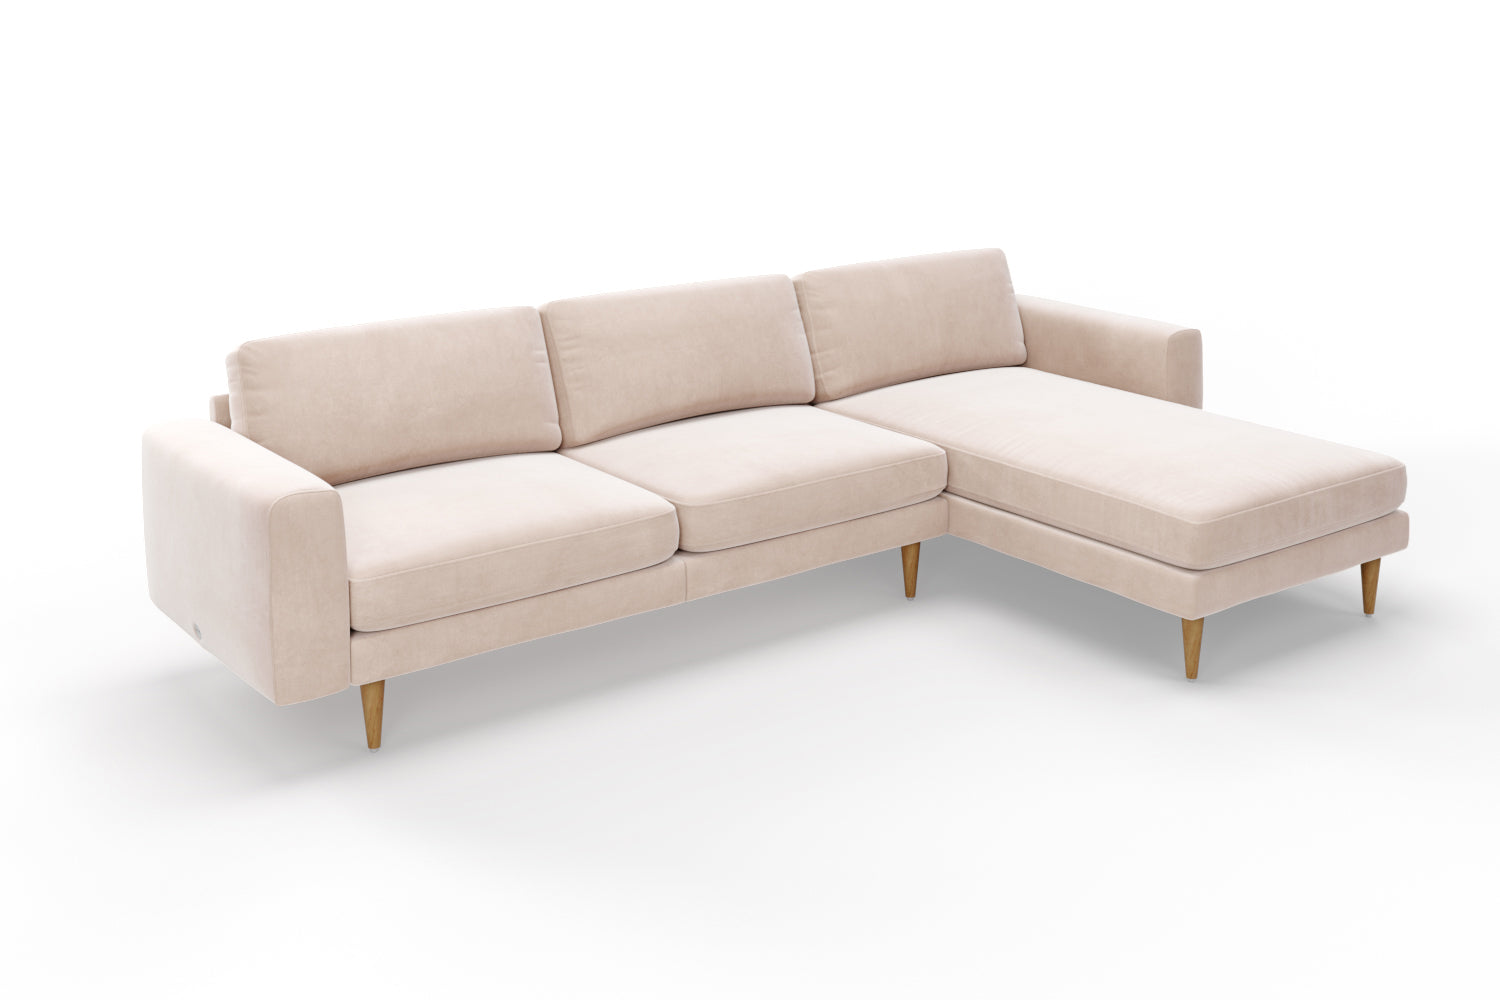 SNUG | The Big Chill Right Hand Chaise Sofa in Taupe